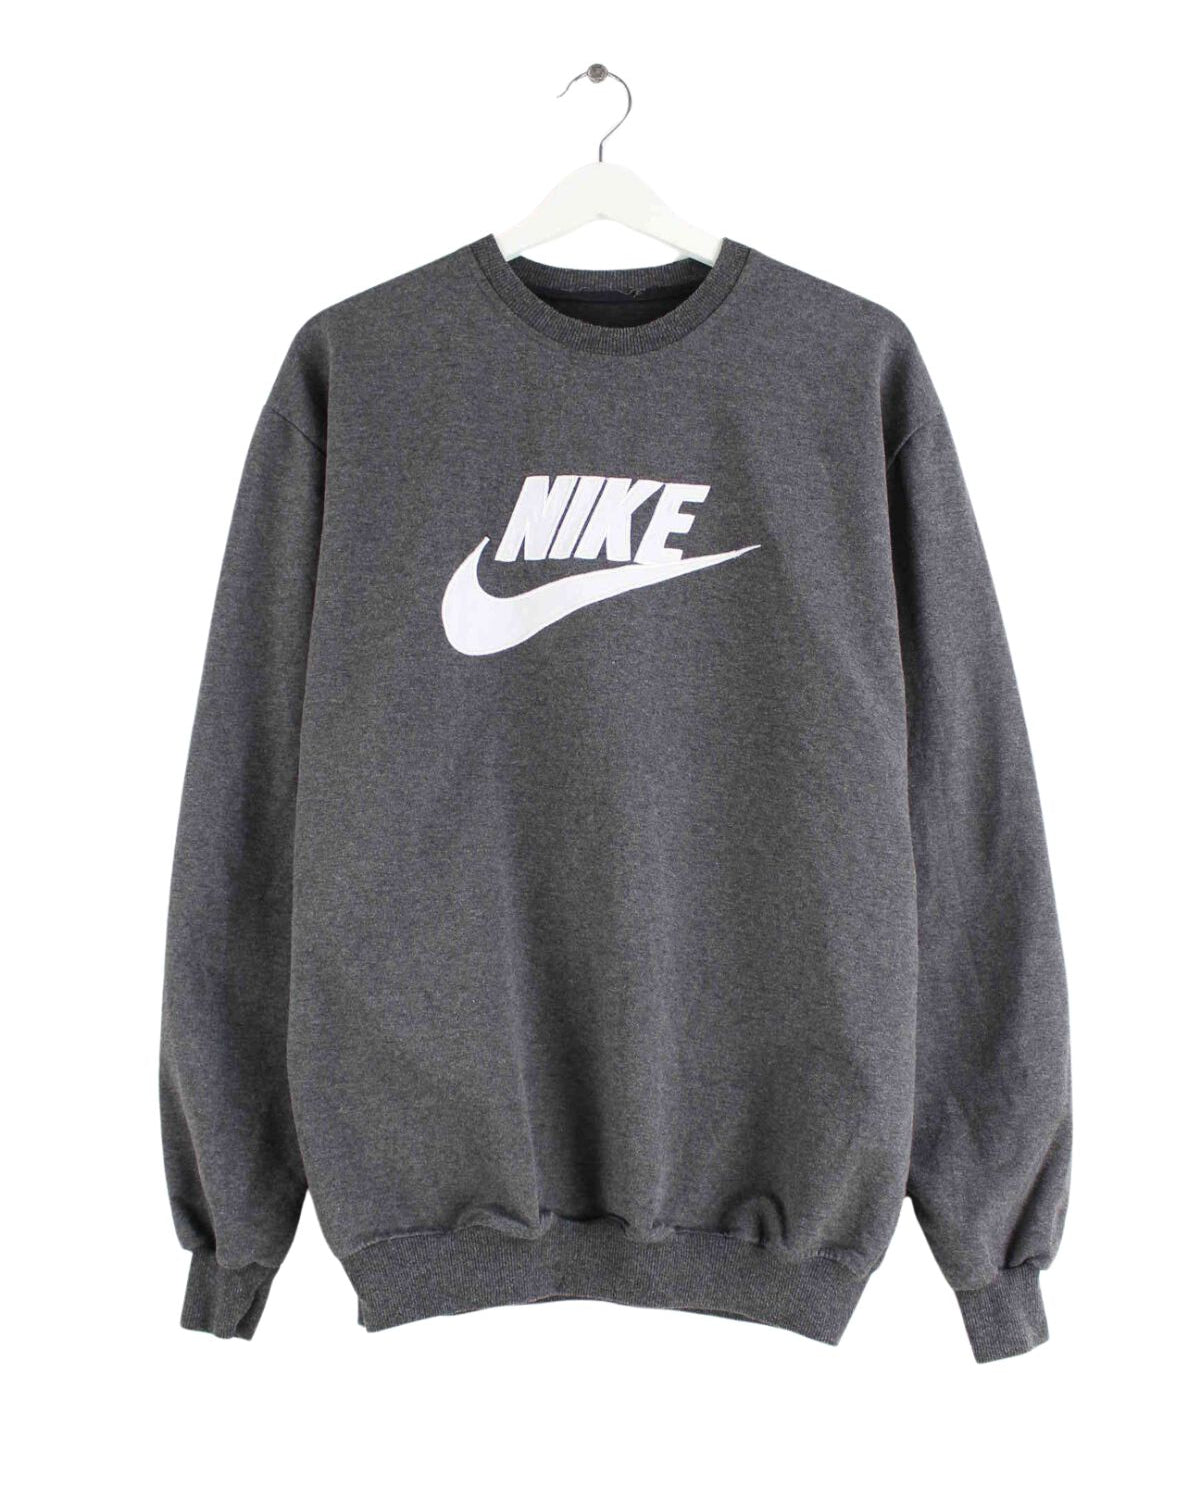 Nike Embroidered Logo Sweater Grau L (front image)